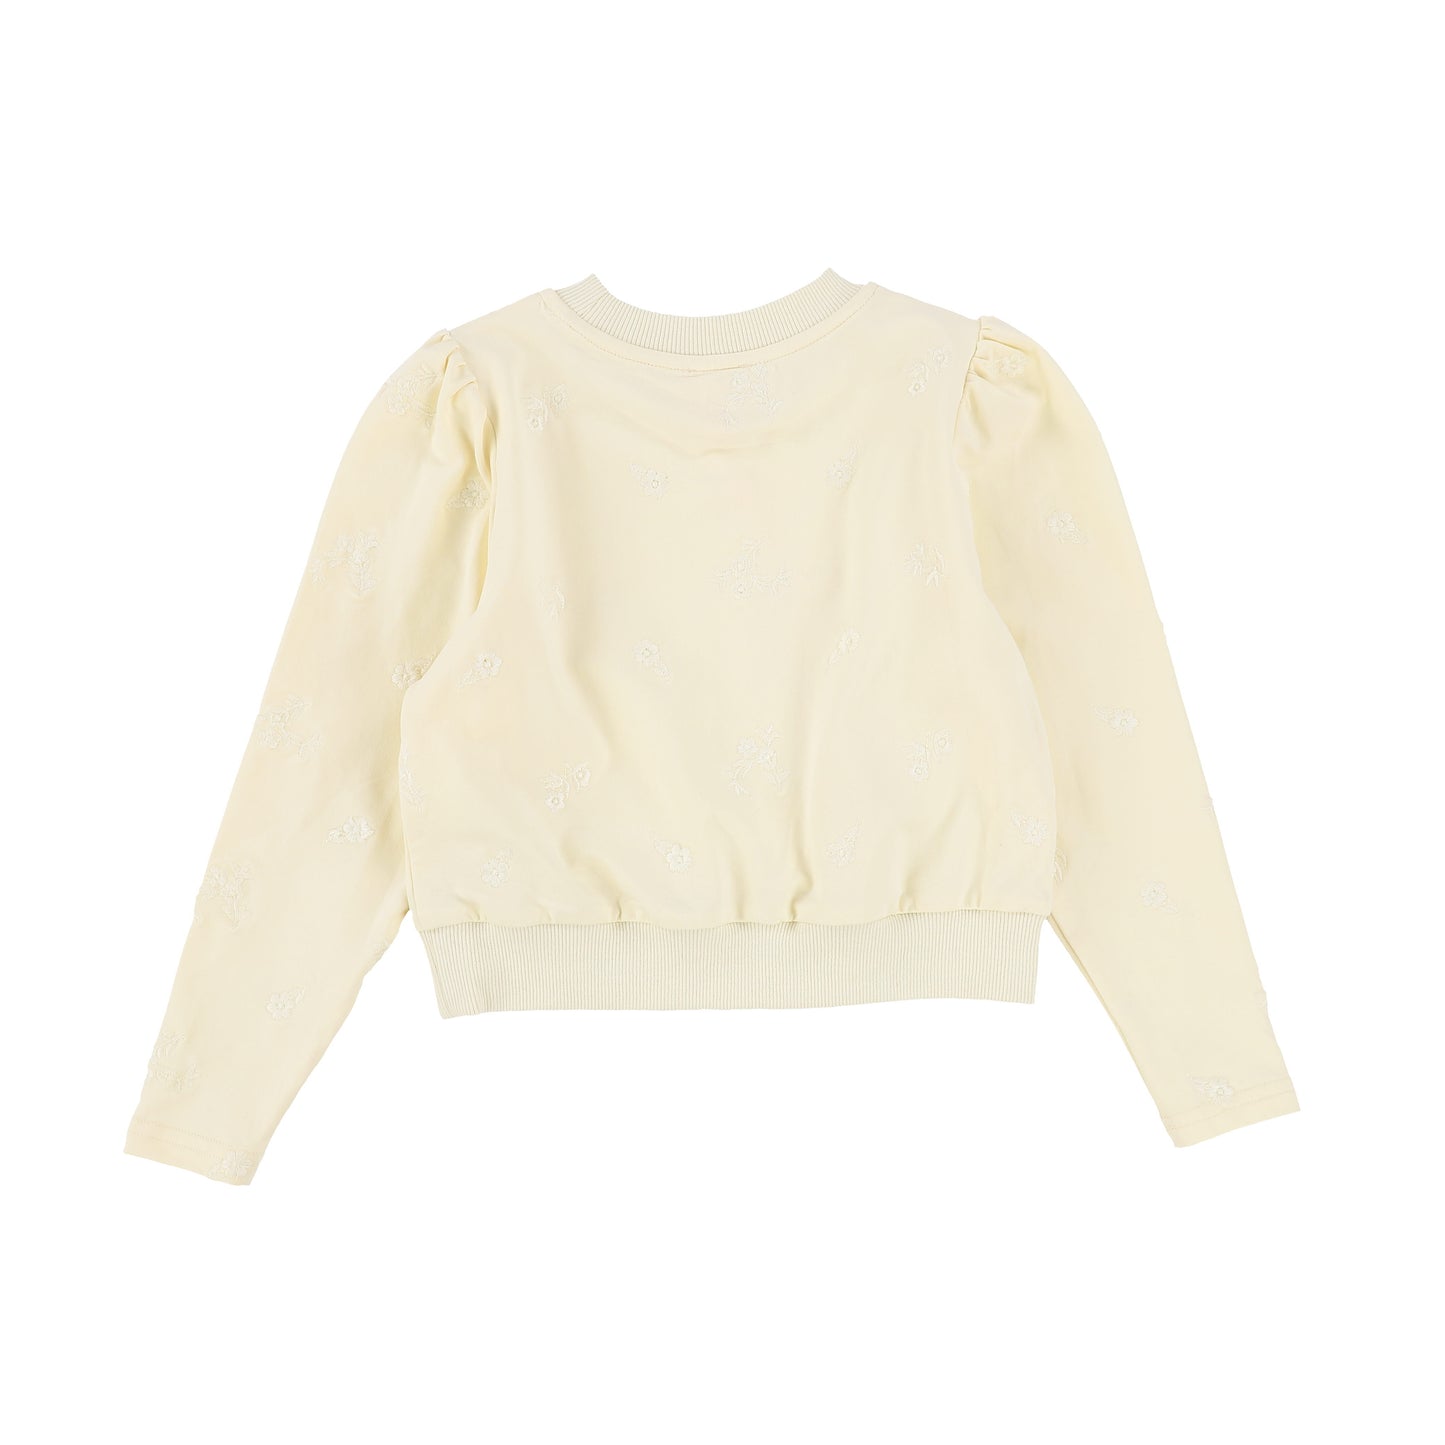 STEPH PASTEL YELLOW FLORAL EMBROIDERED SWEATSHIRT [Final Sale]